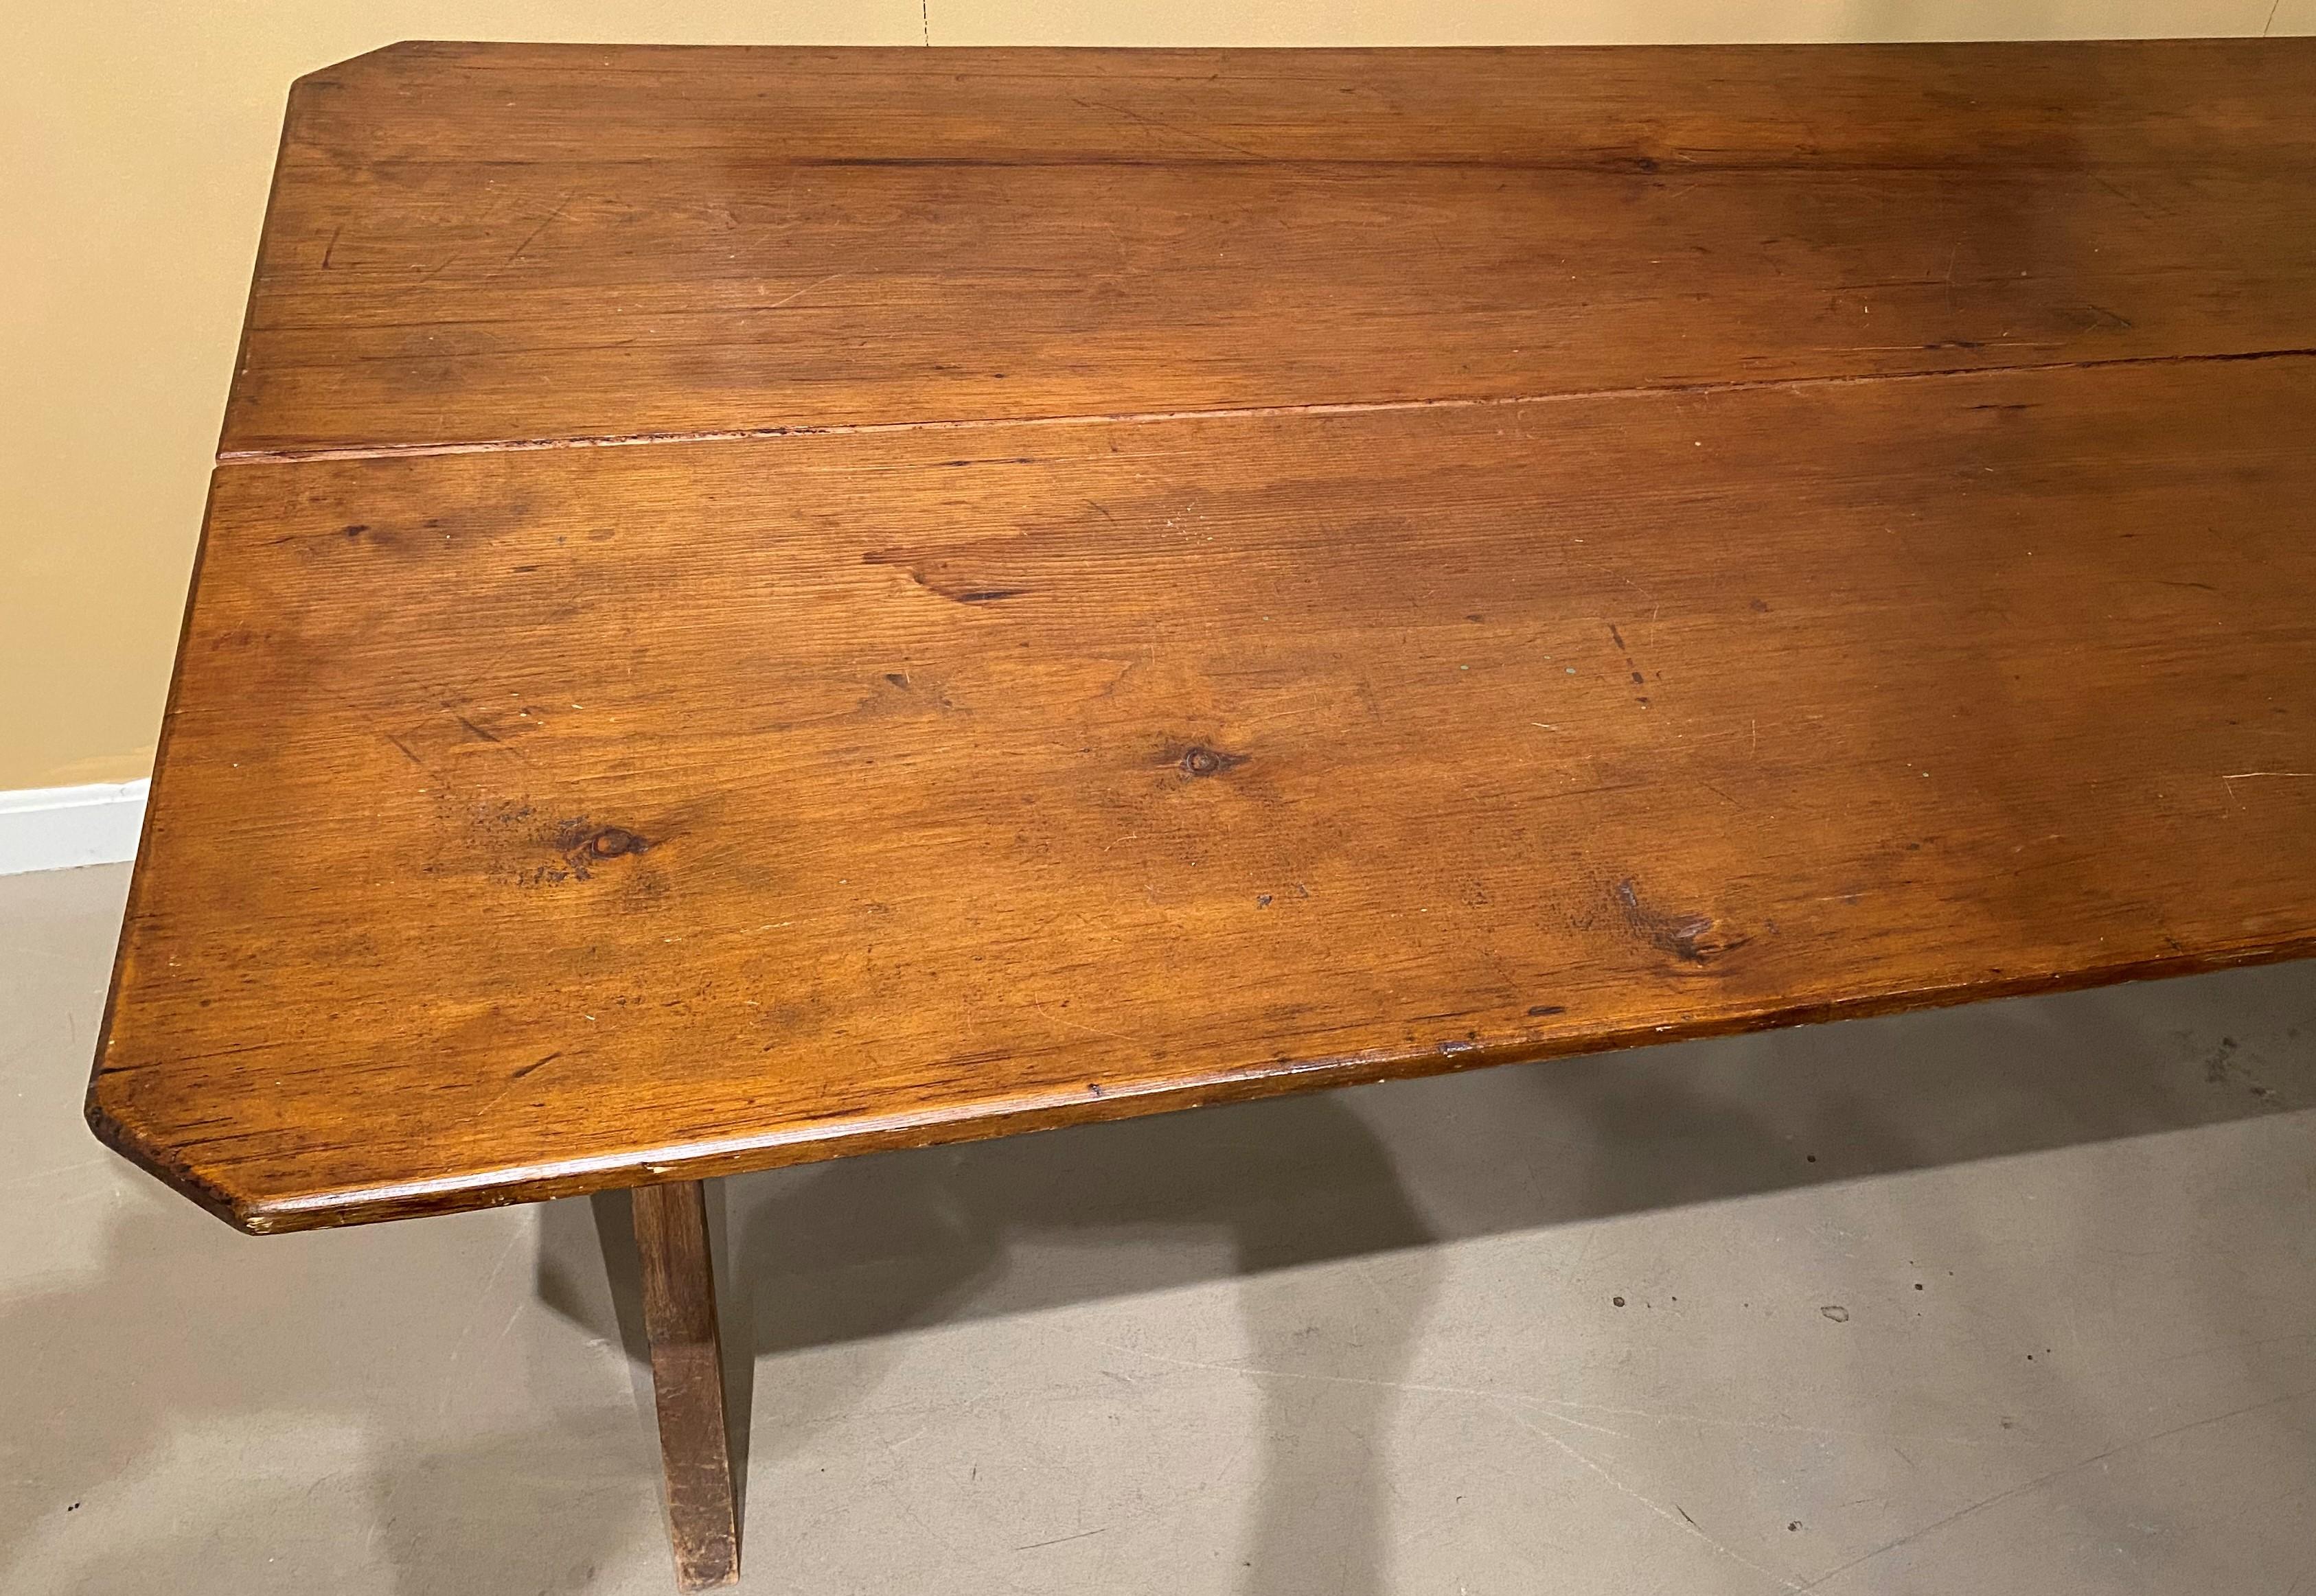 Rustic 19th Century American Sawbuck Trestle Dining Table with Two Board Top